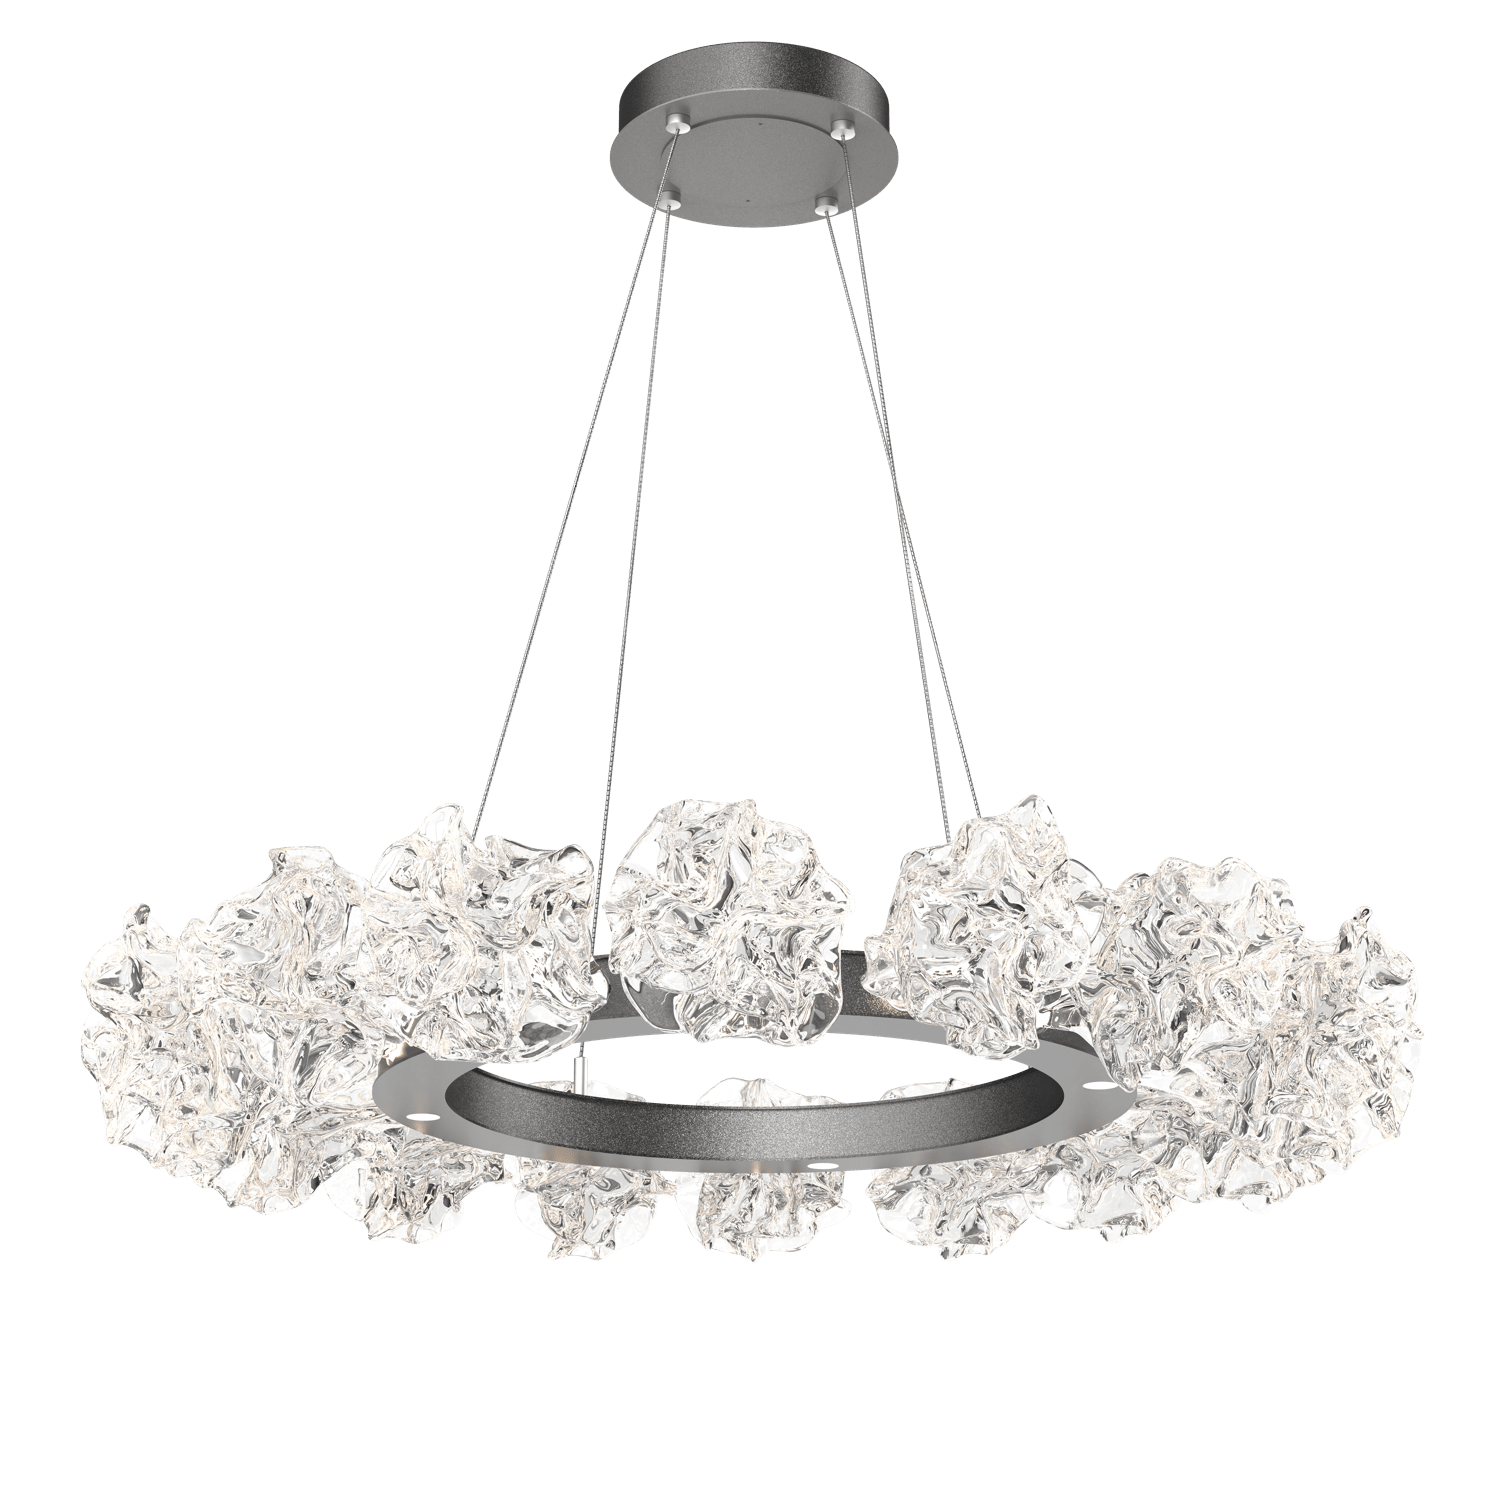 CHB0059-36-GP-Hammerton-Studio-Blossom-36-inch-radial-ring-chandelier-with-graphite-finish-and-clear-handblown-crystal-glass-shades-and-LED-lamping